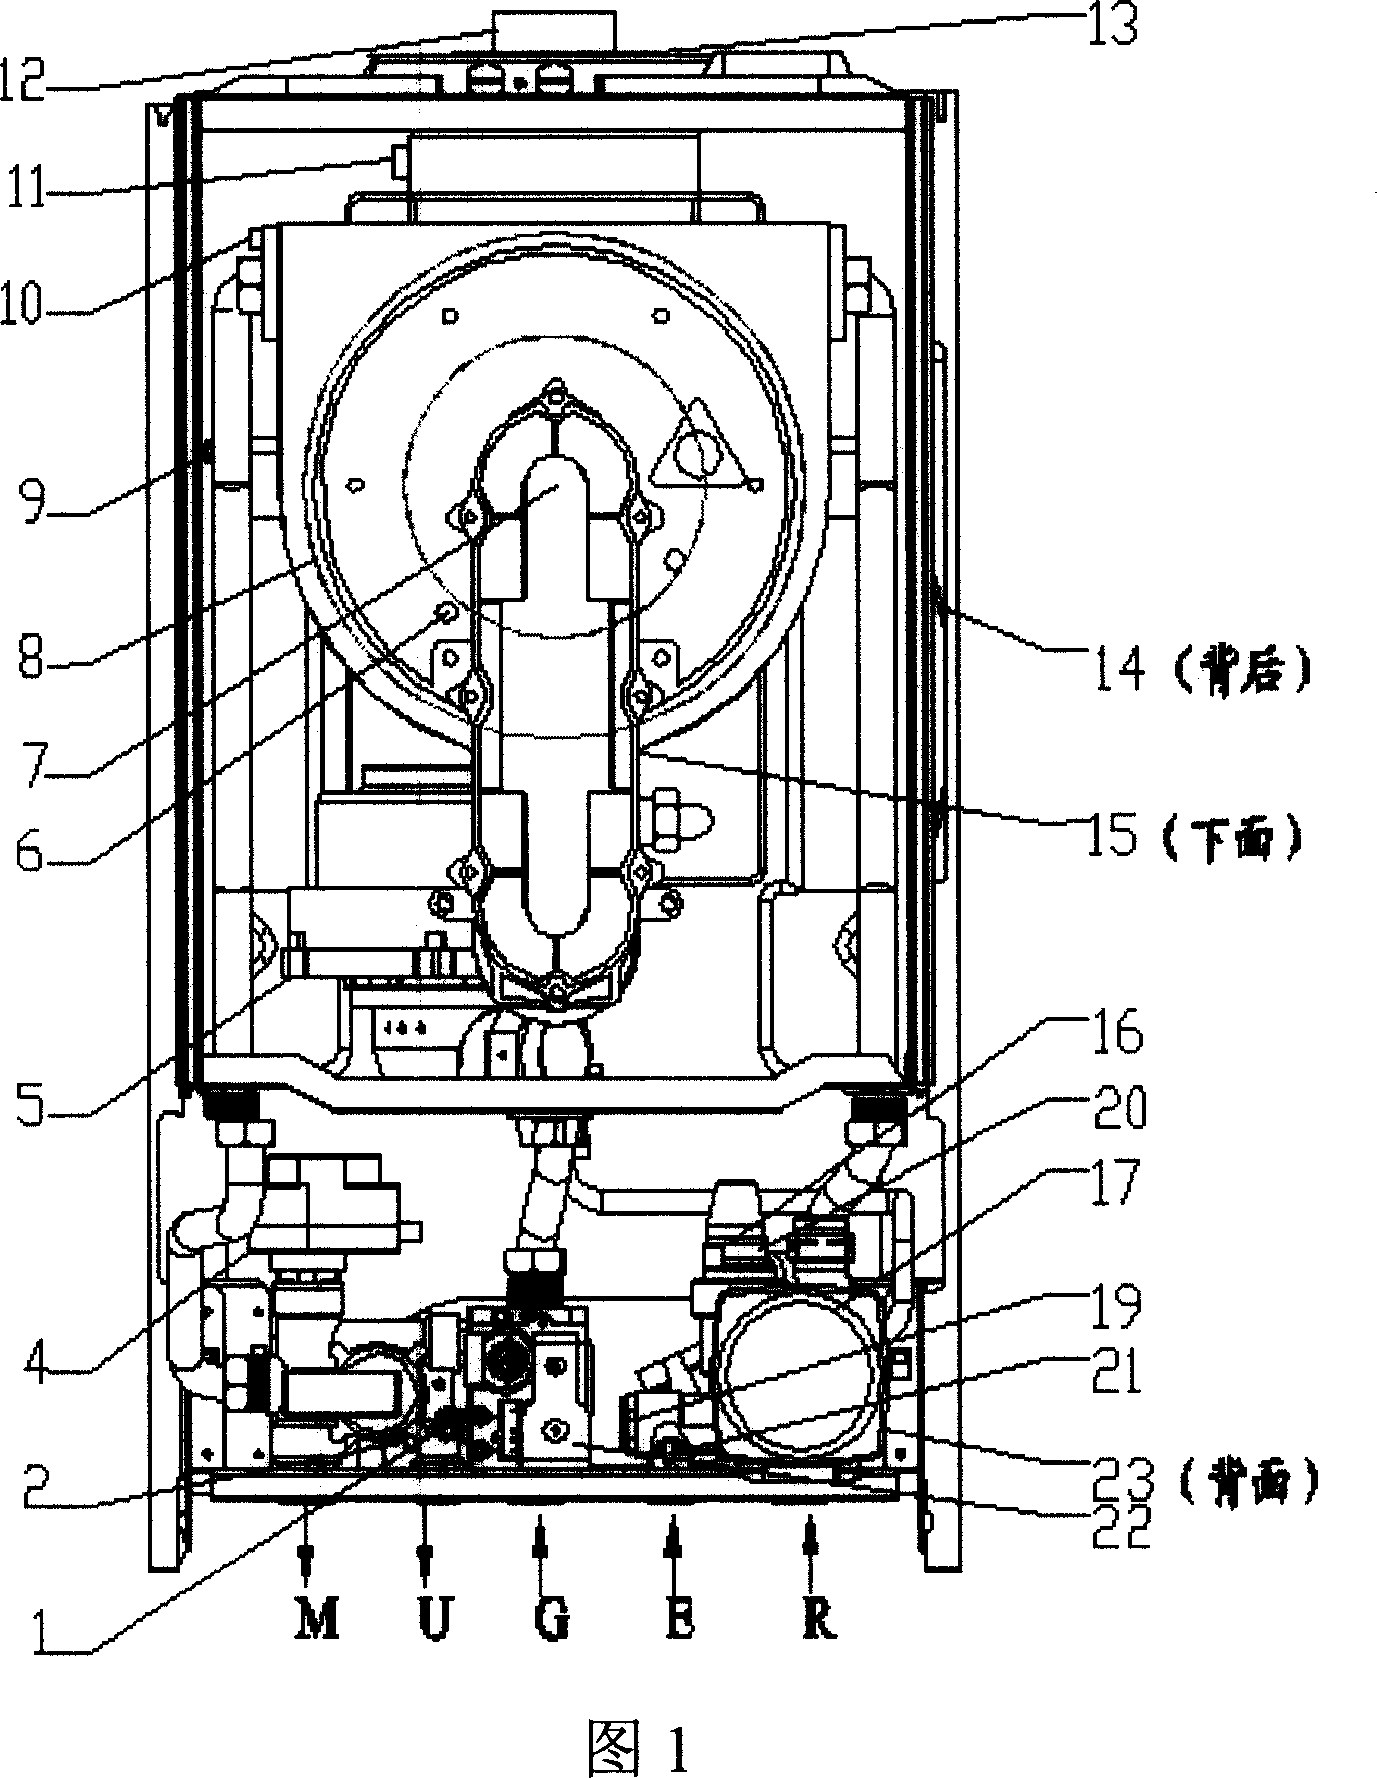 Full pre-mix condensing heating hot-water dual-purpose device